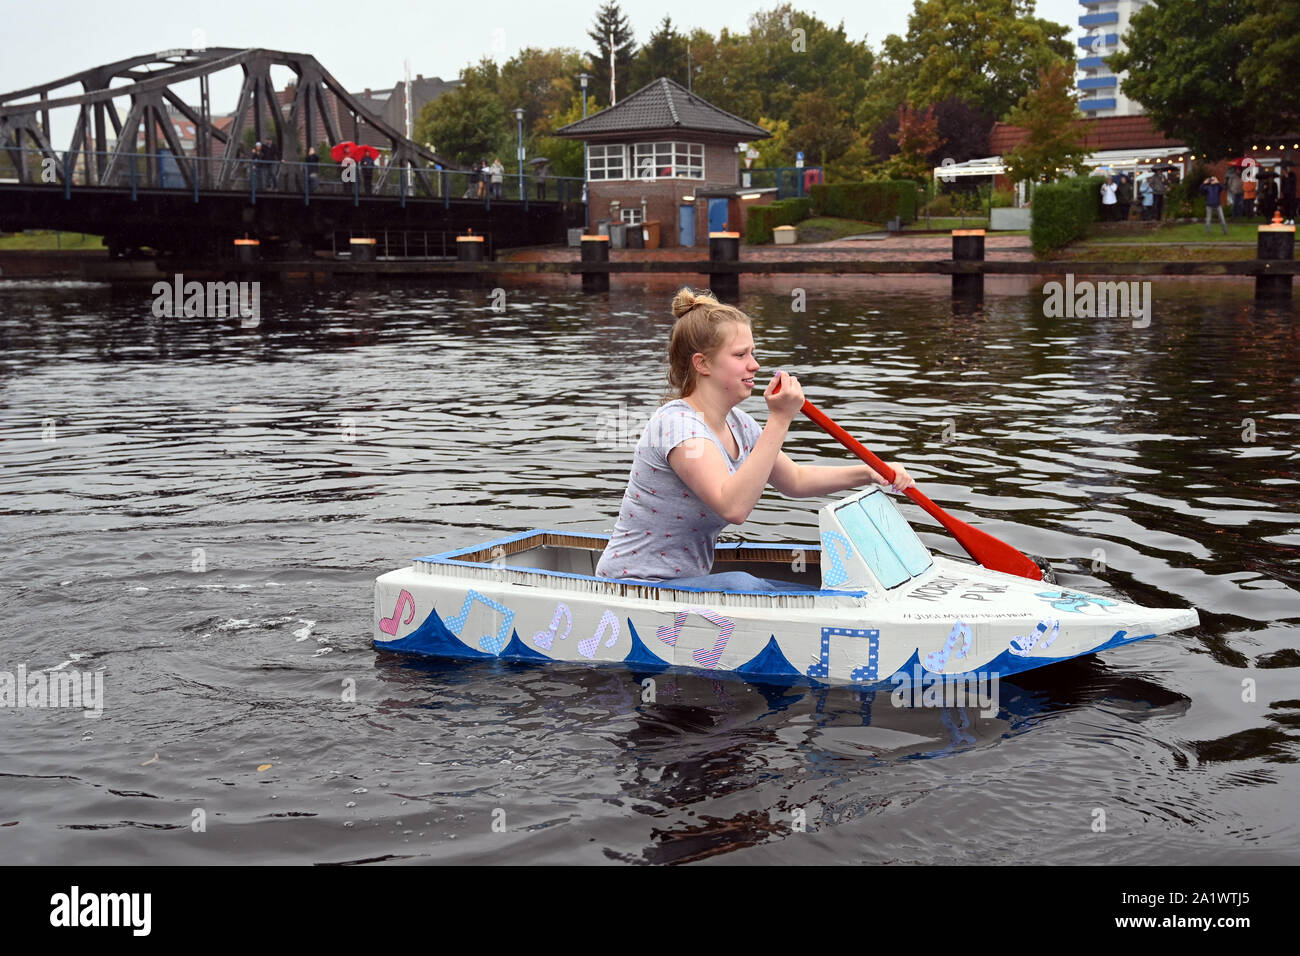 Wilhelmshaven, Germany. 29th Sep, 2019. The later winner Dana paddles at the PapierBootRegatta with her self-built paper boat on the Ems-Jade canal. The participants try to cover a distance of about 200 meters in the water to the finish line. The boats may only be made of cardboard, paper, tape and glue, only the paddles may be made of wood or plastic. Credit: Carmen Jaspersen/dpa/Alamy Live News Stock Photo